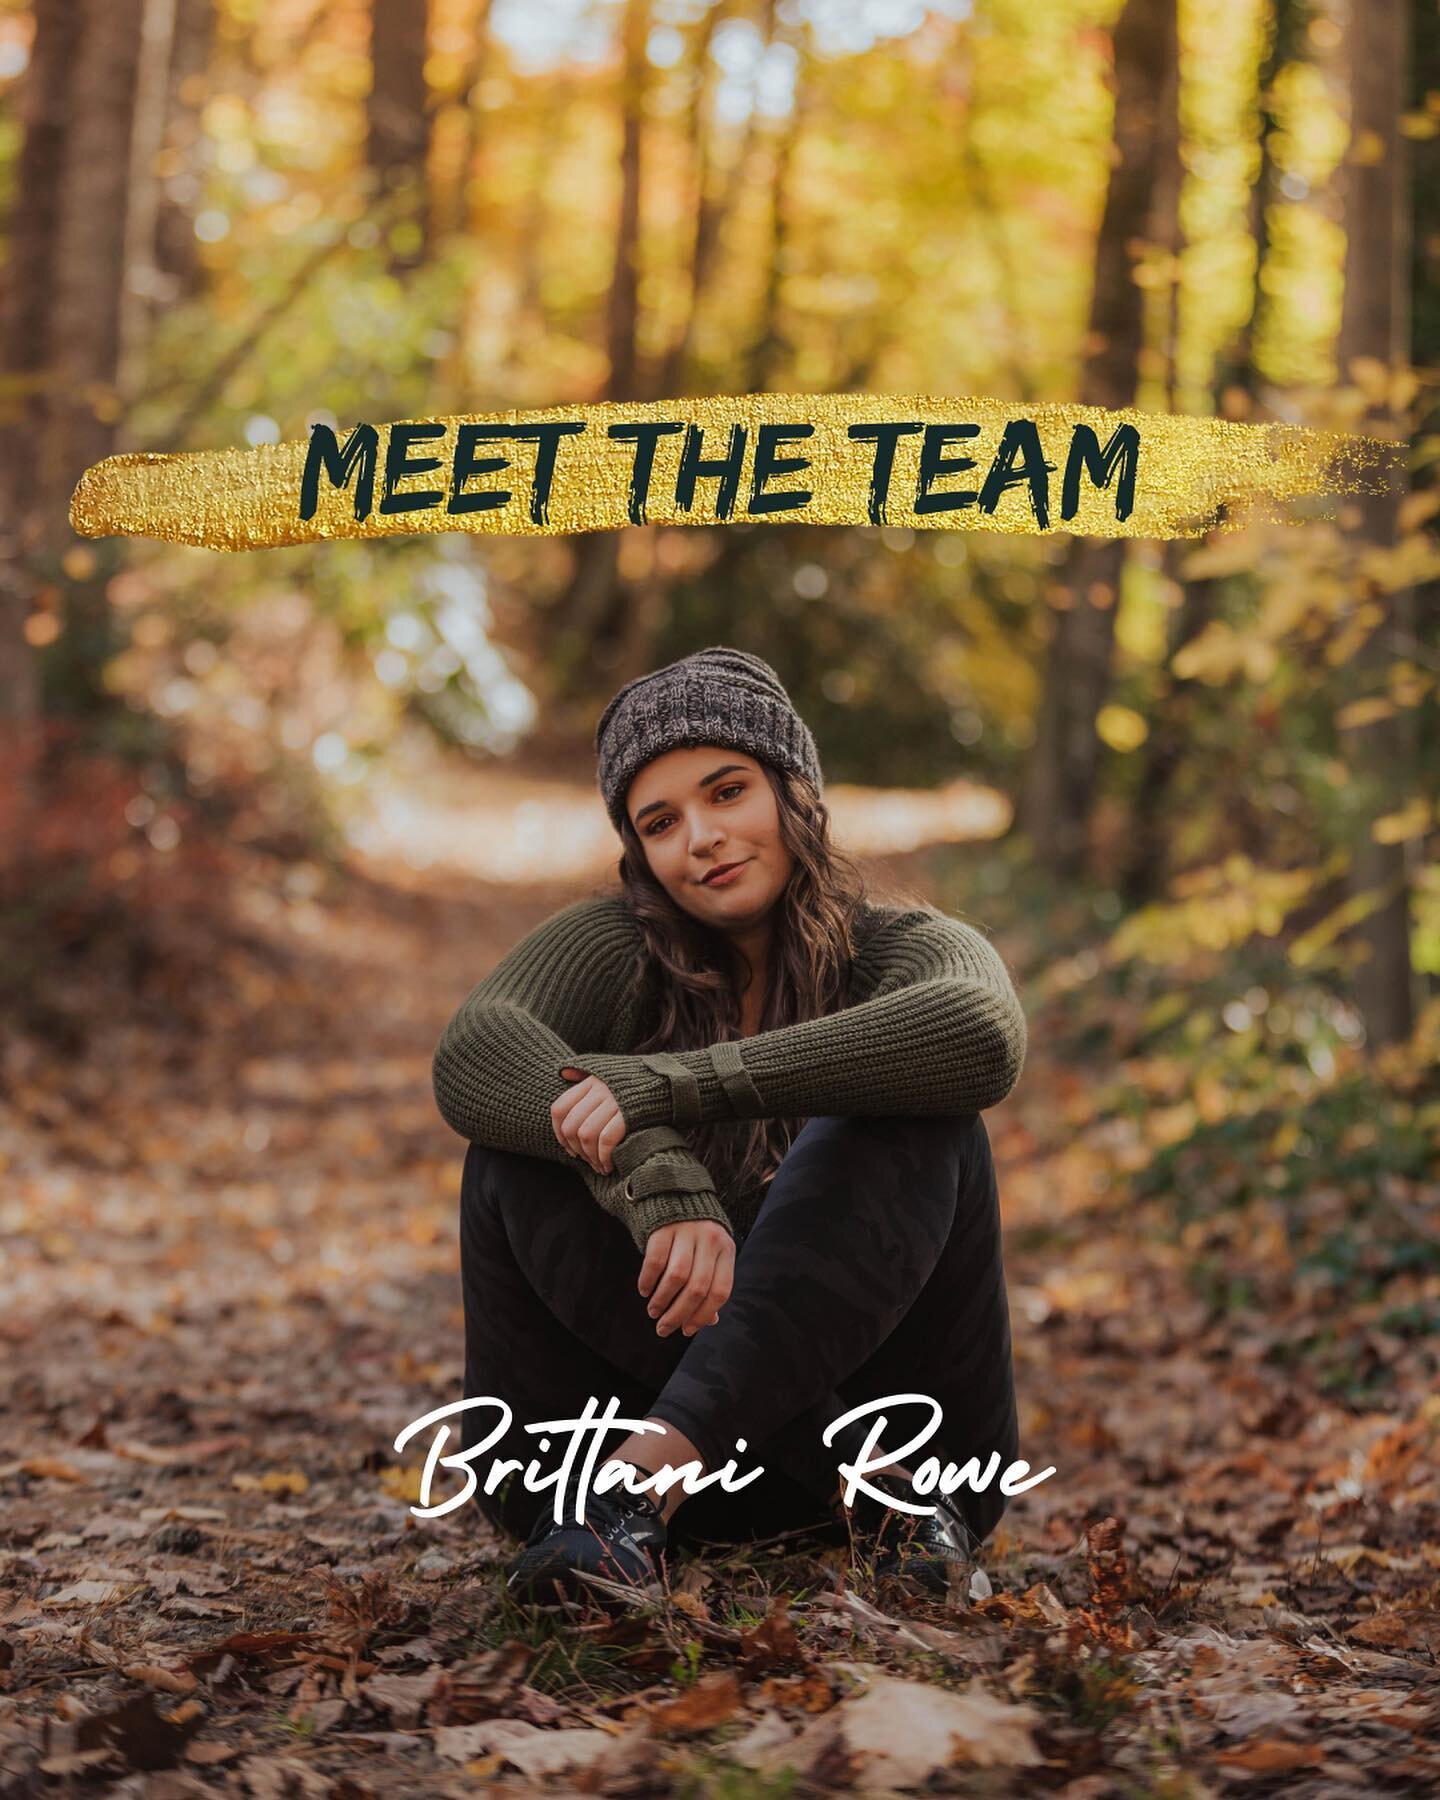 Meet one of our co-founders: Brittani!

Brittani is a #RD2B that specializes in sports nutrition, eating disorders, plant-based eating and HAES practices

Her company roles include Head of Marketing, Community Coordinator, and Product Development

Br